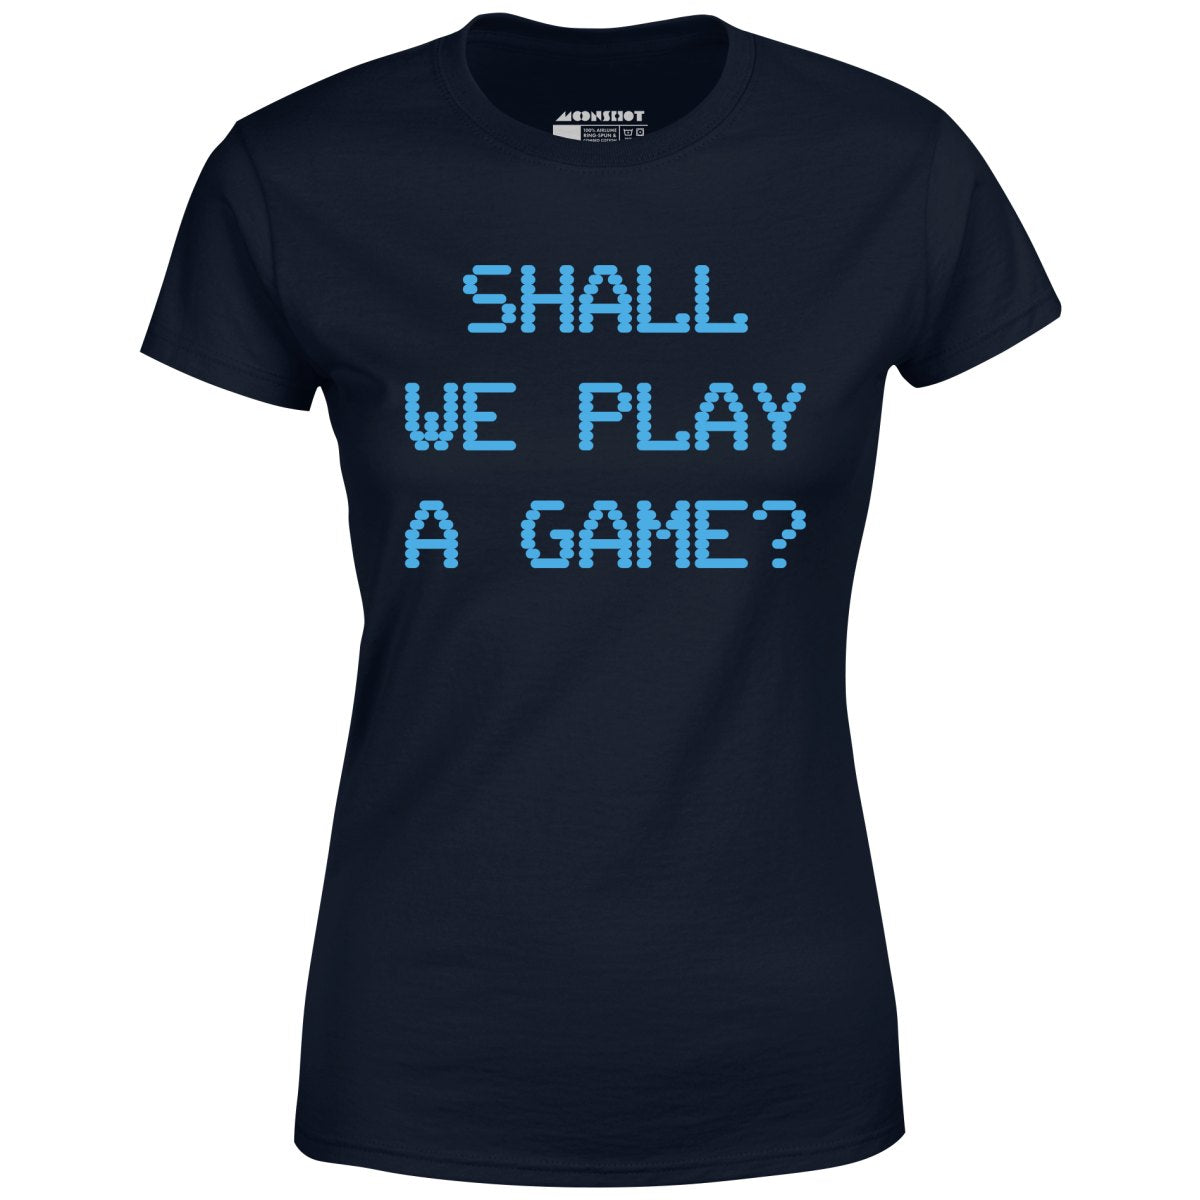 Shall We Play a Game? - Women's T-Shirt